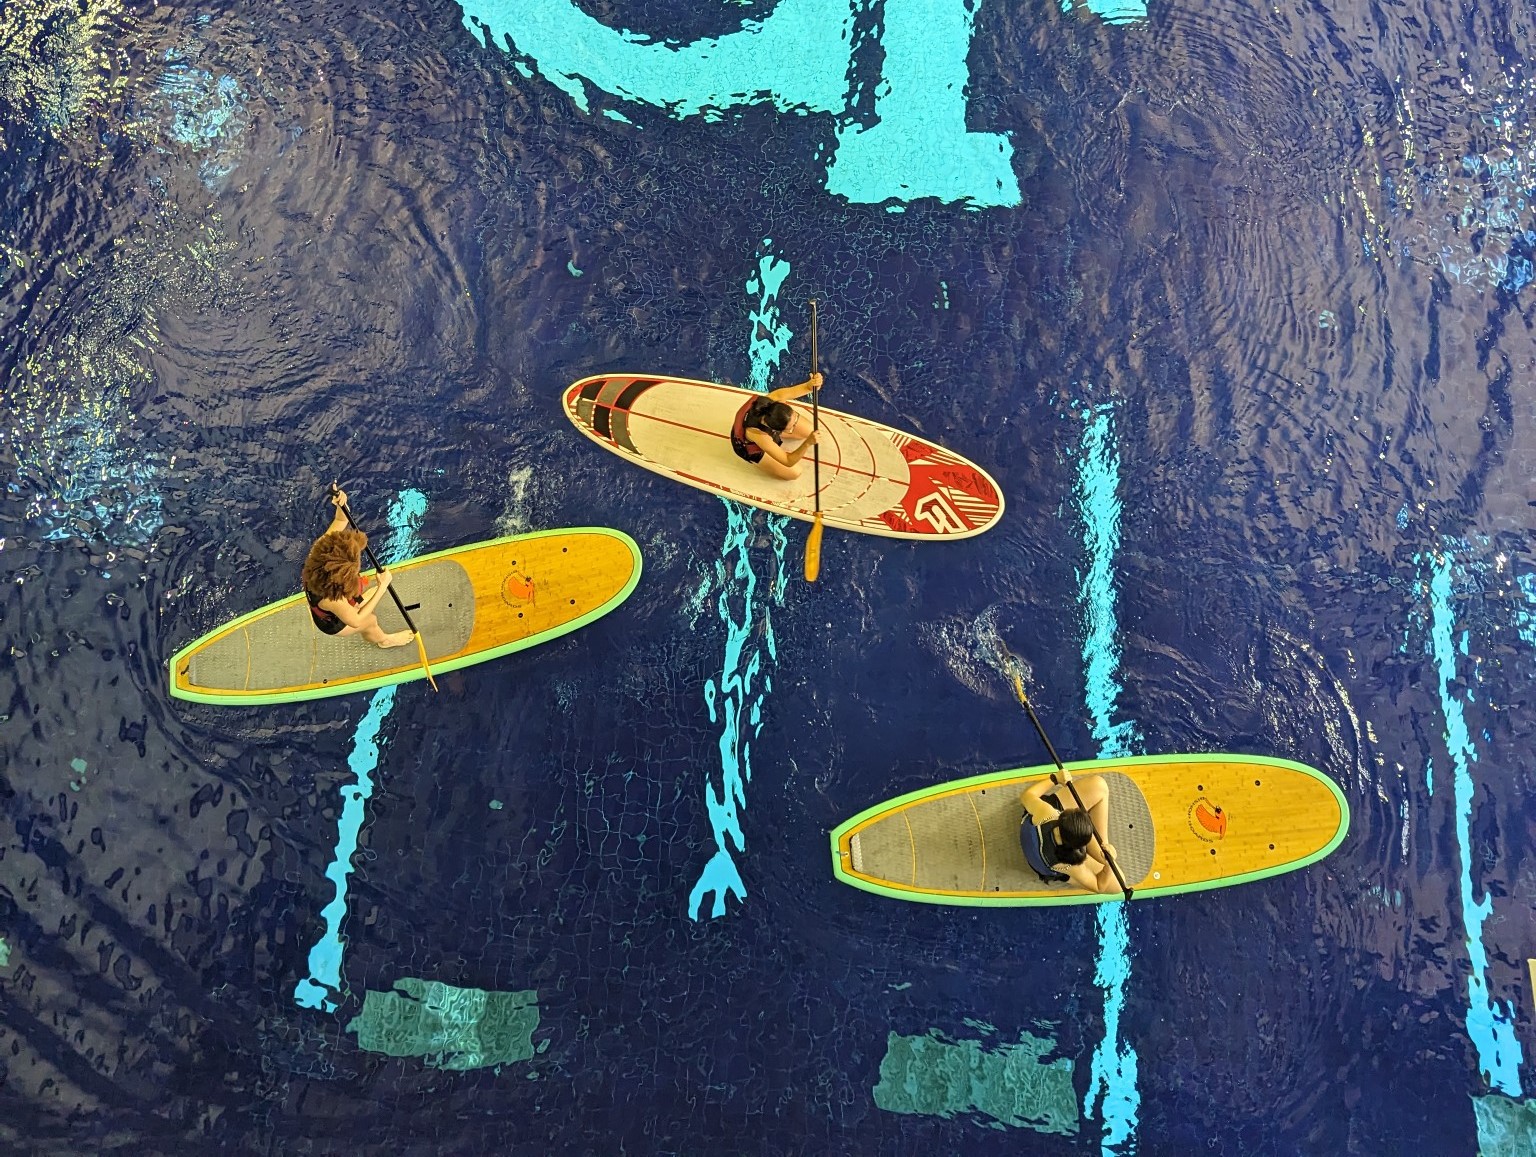 Participants paddleboarding in the competition pool